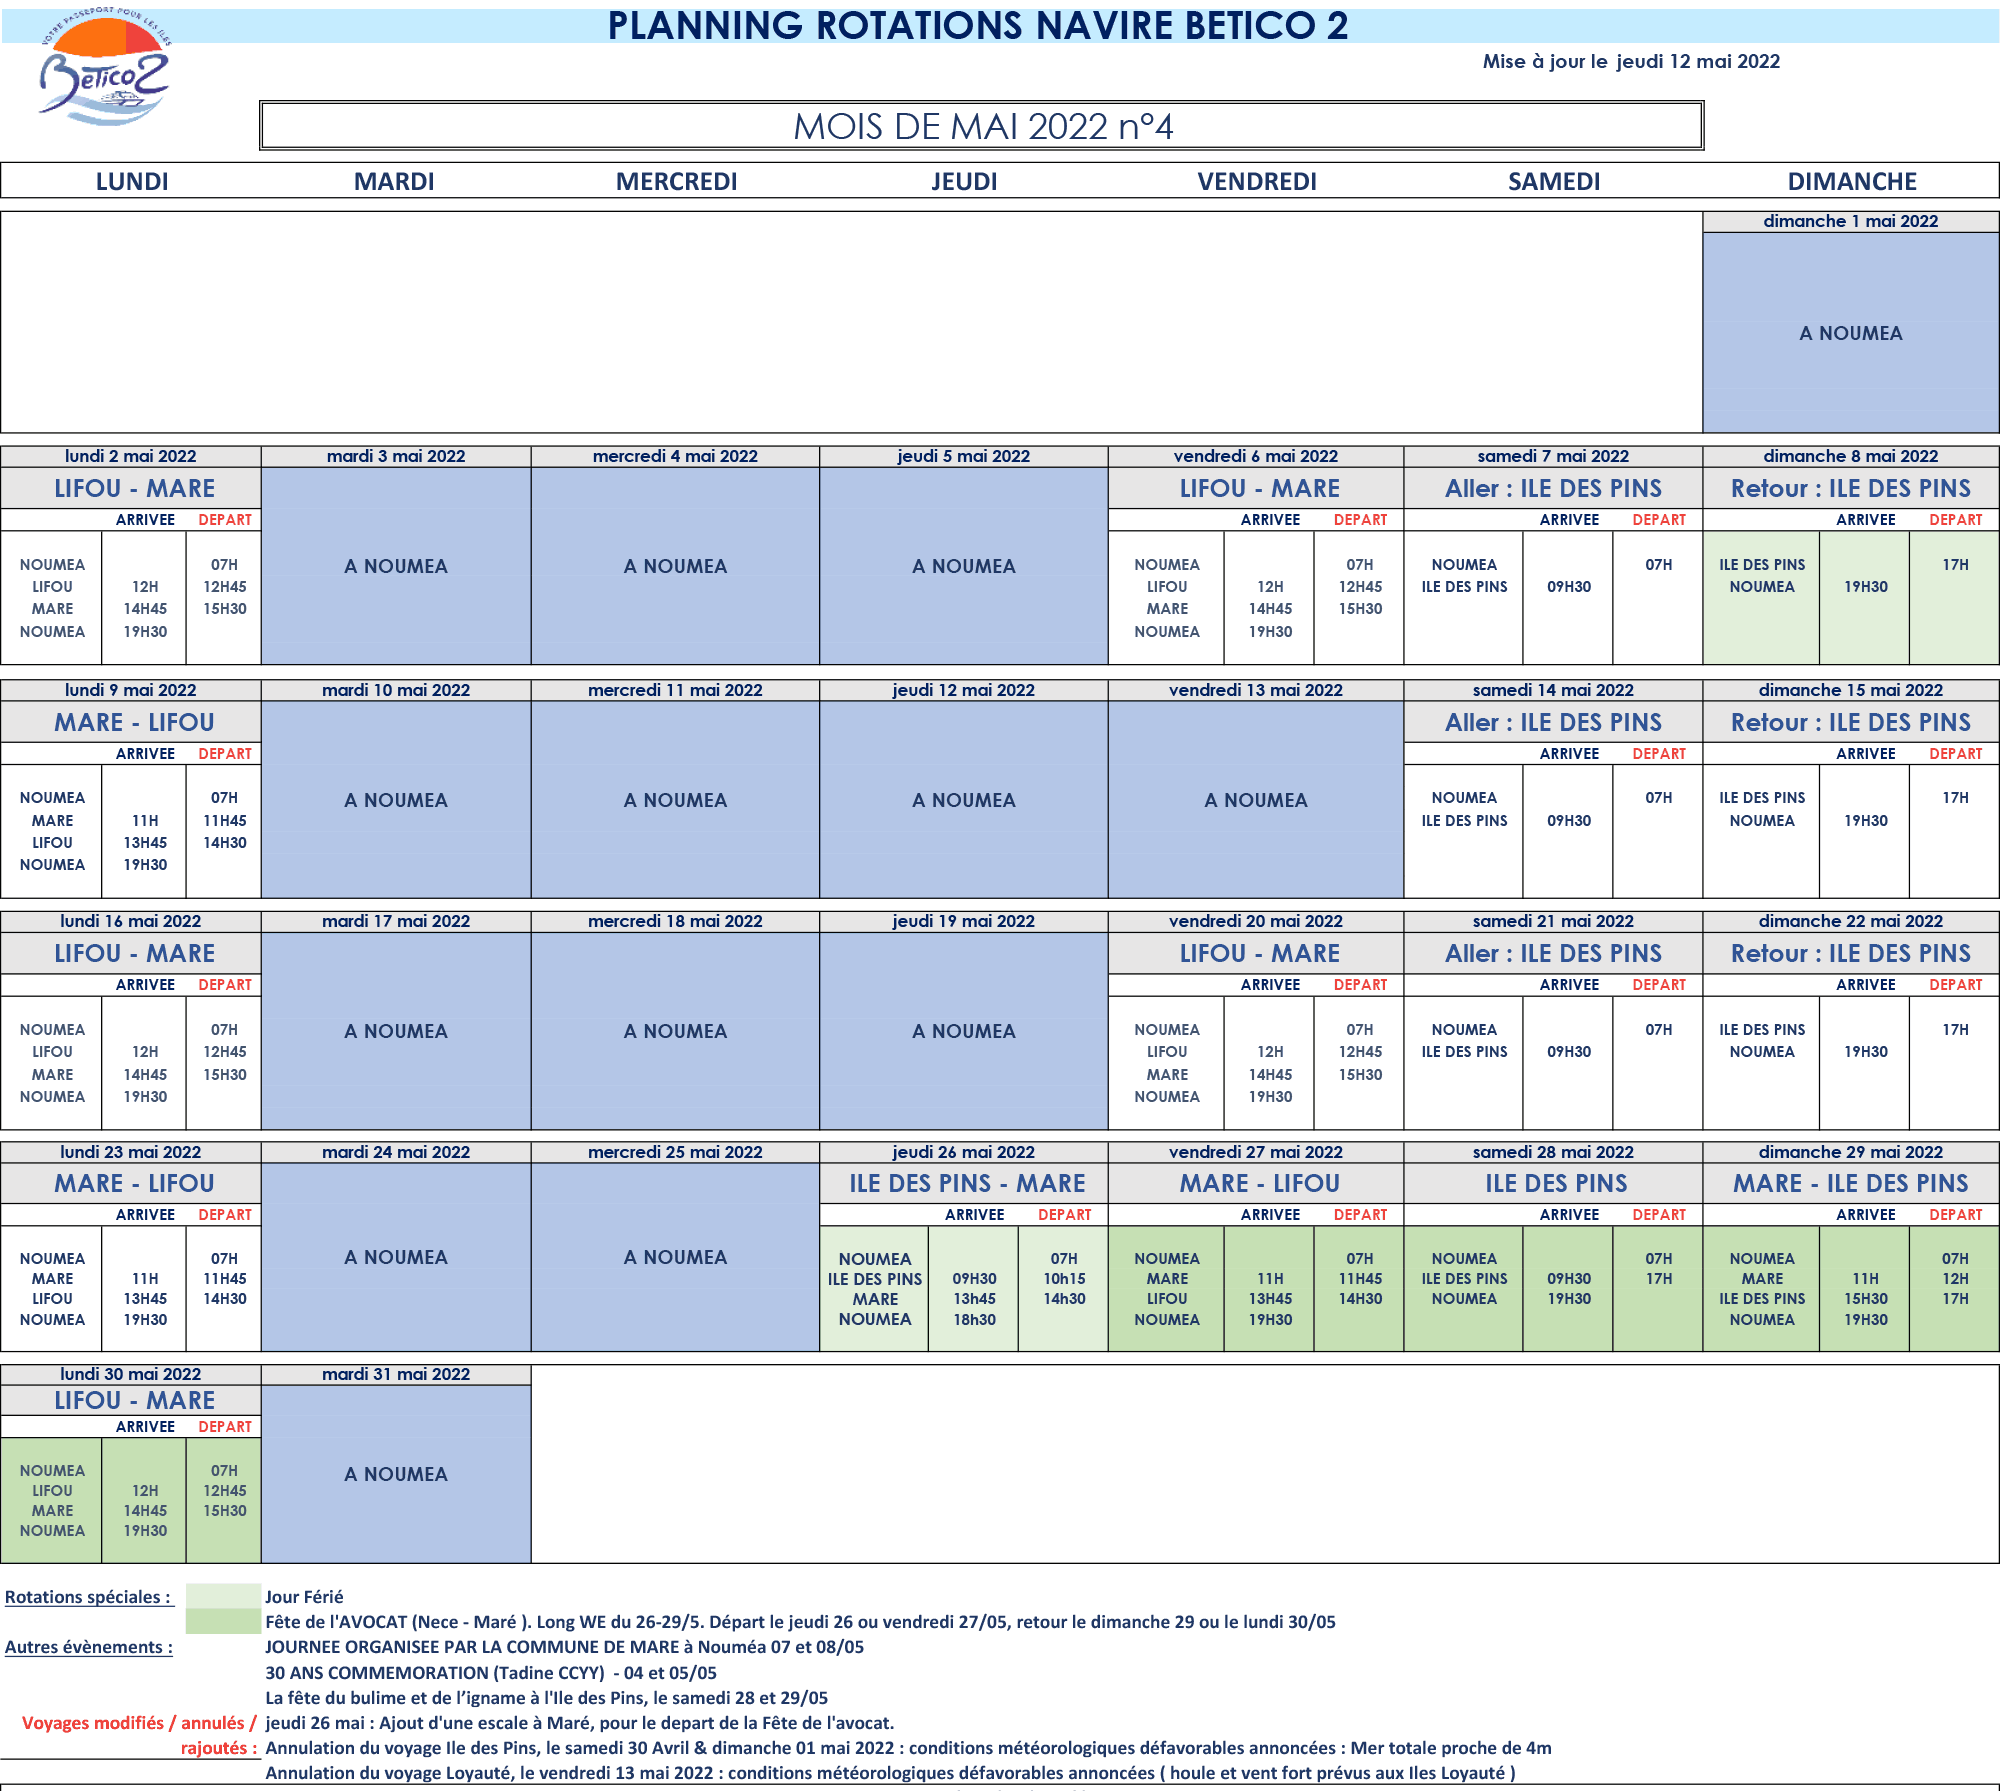 Horaires Betico2